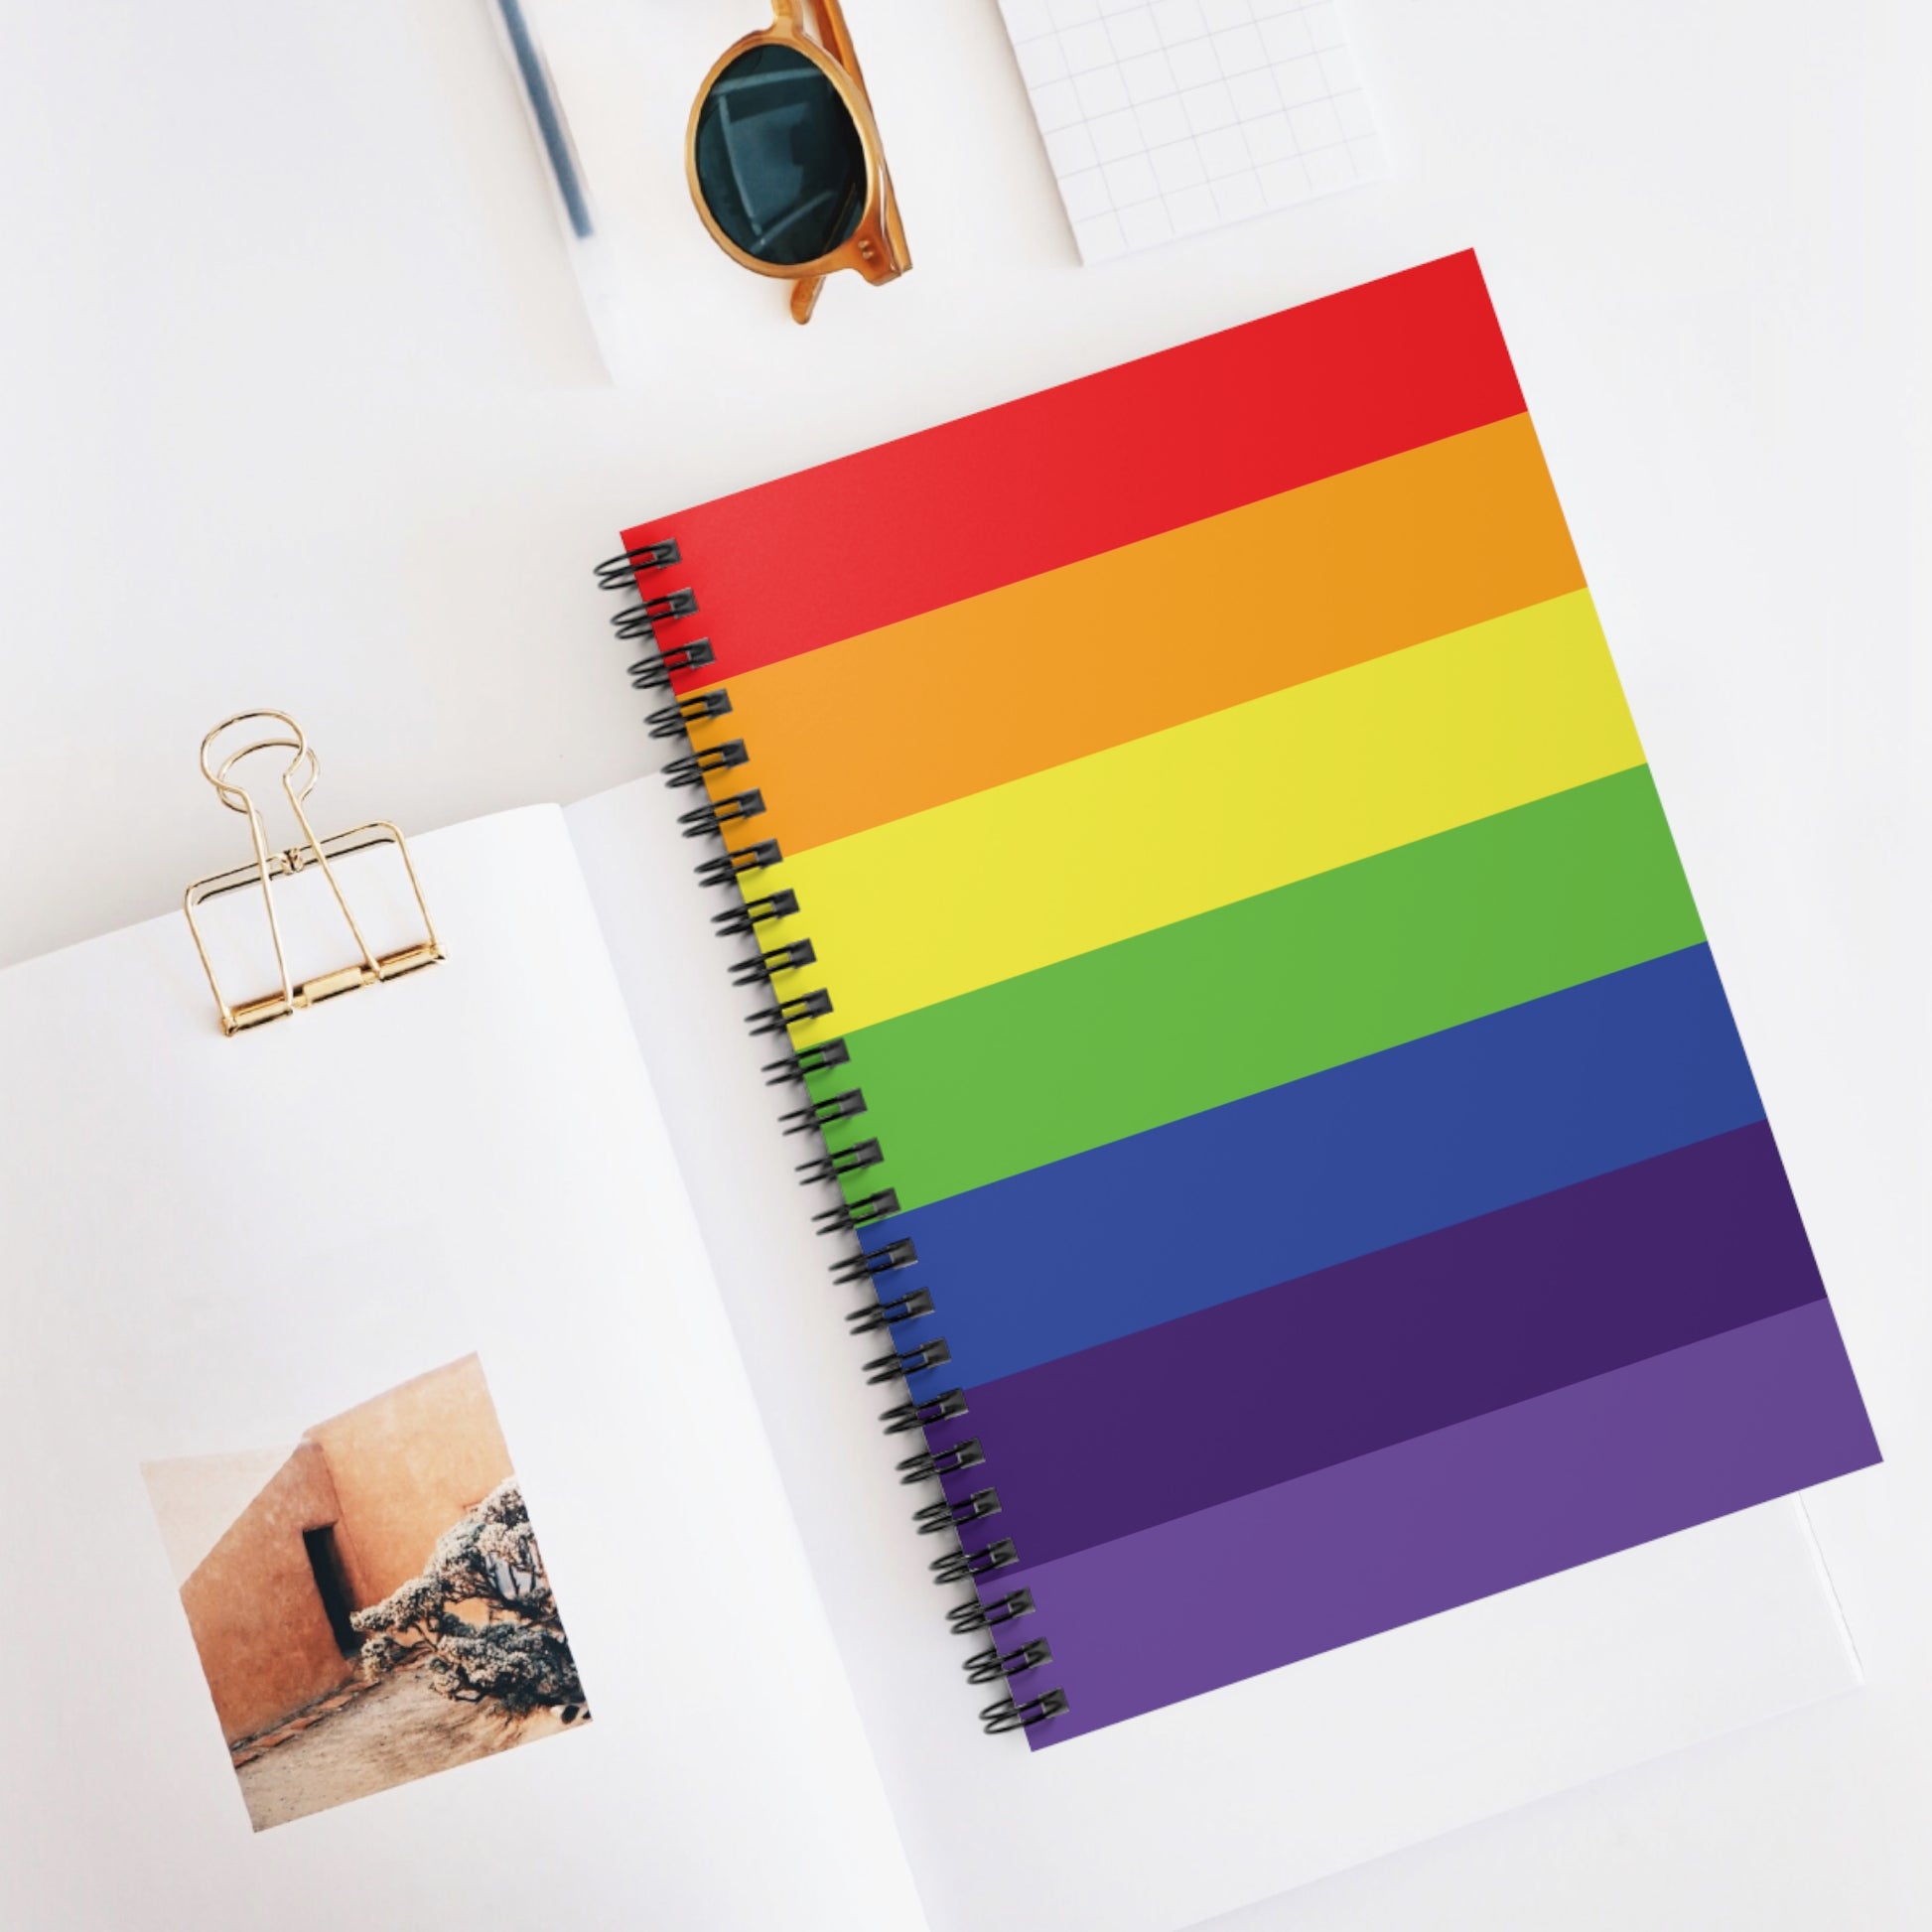 Rainbow Pride: Spiral Notebook - Log Books - Journals - Diaries - and More Custom Printed by TheGlassyLass